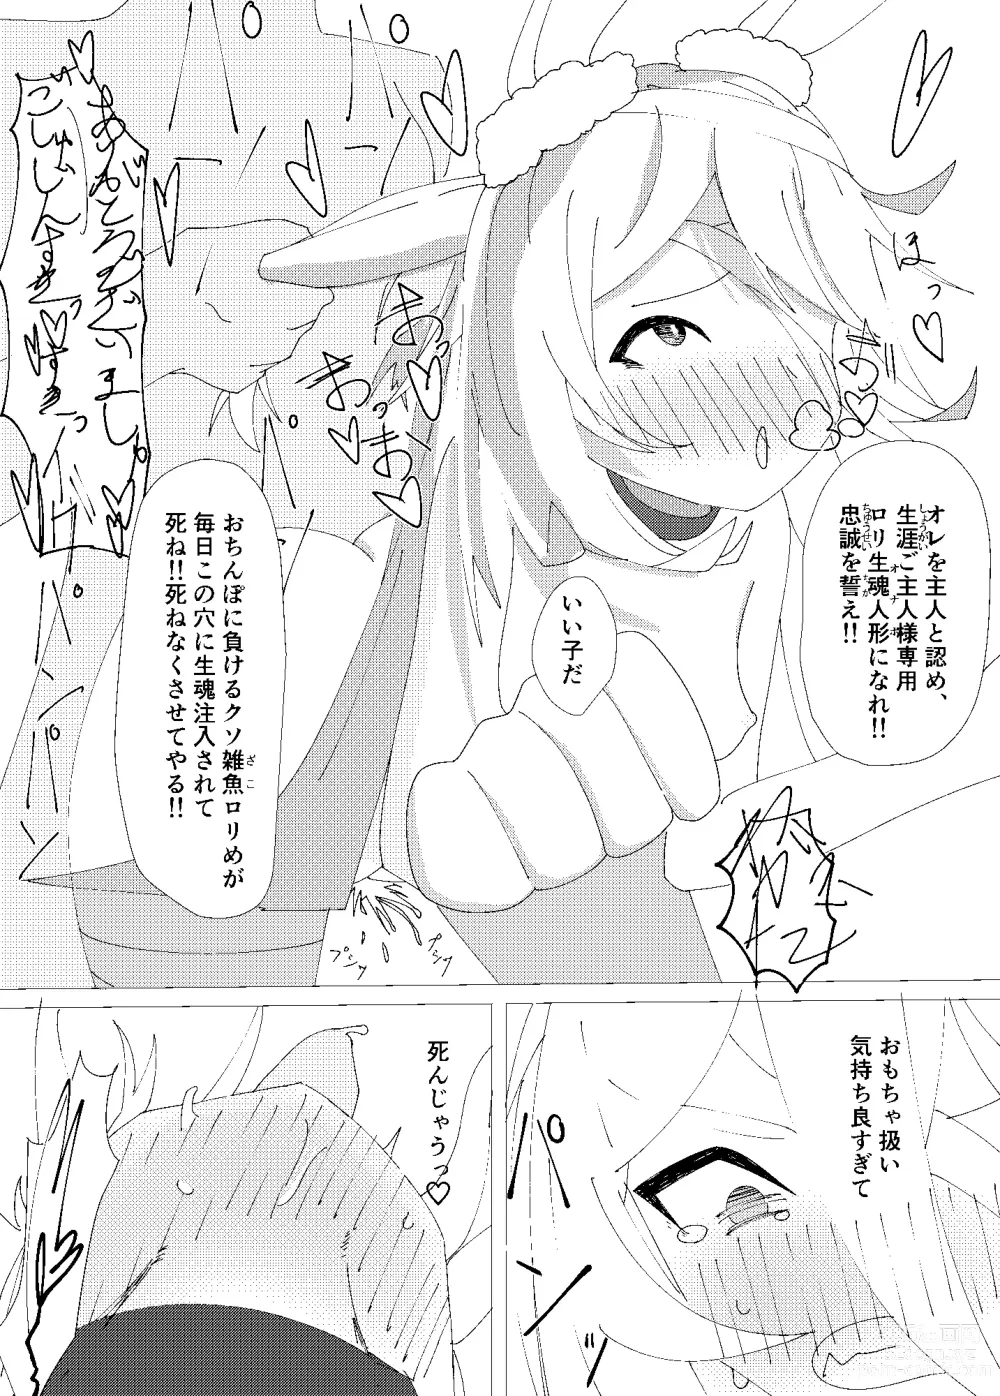 Page 3 of doujinshi 隅々四隅s illustrations - pixiv